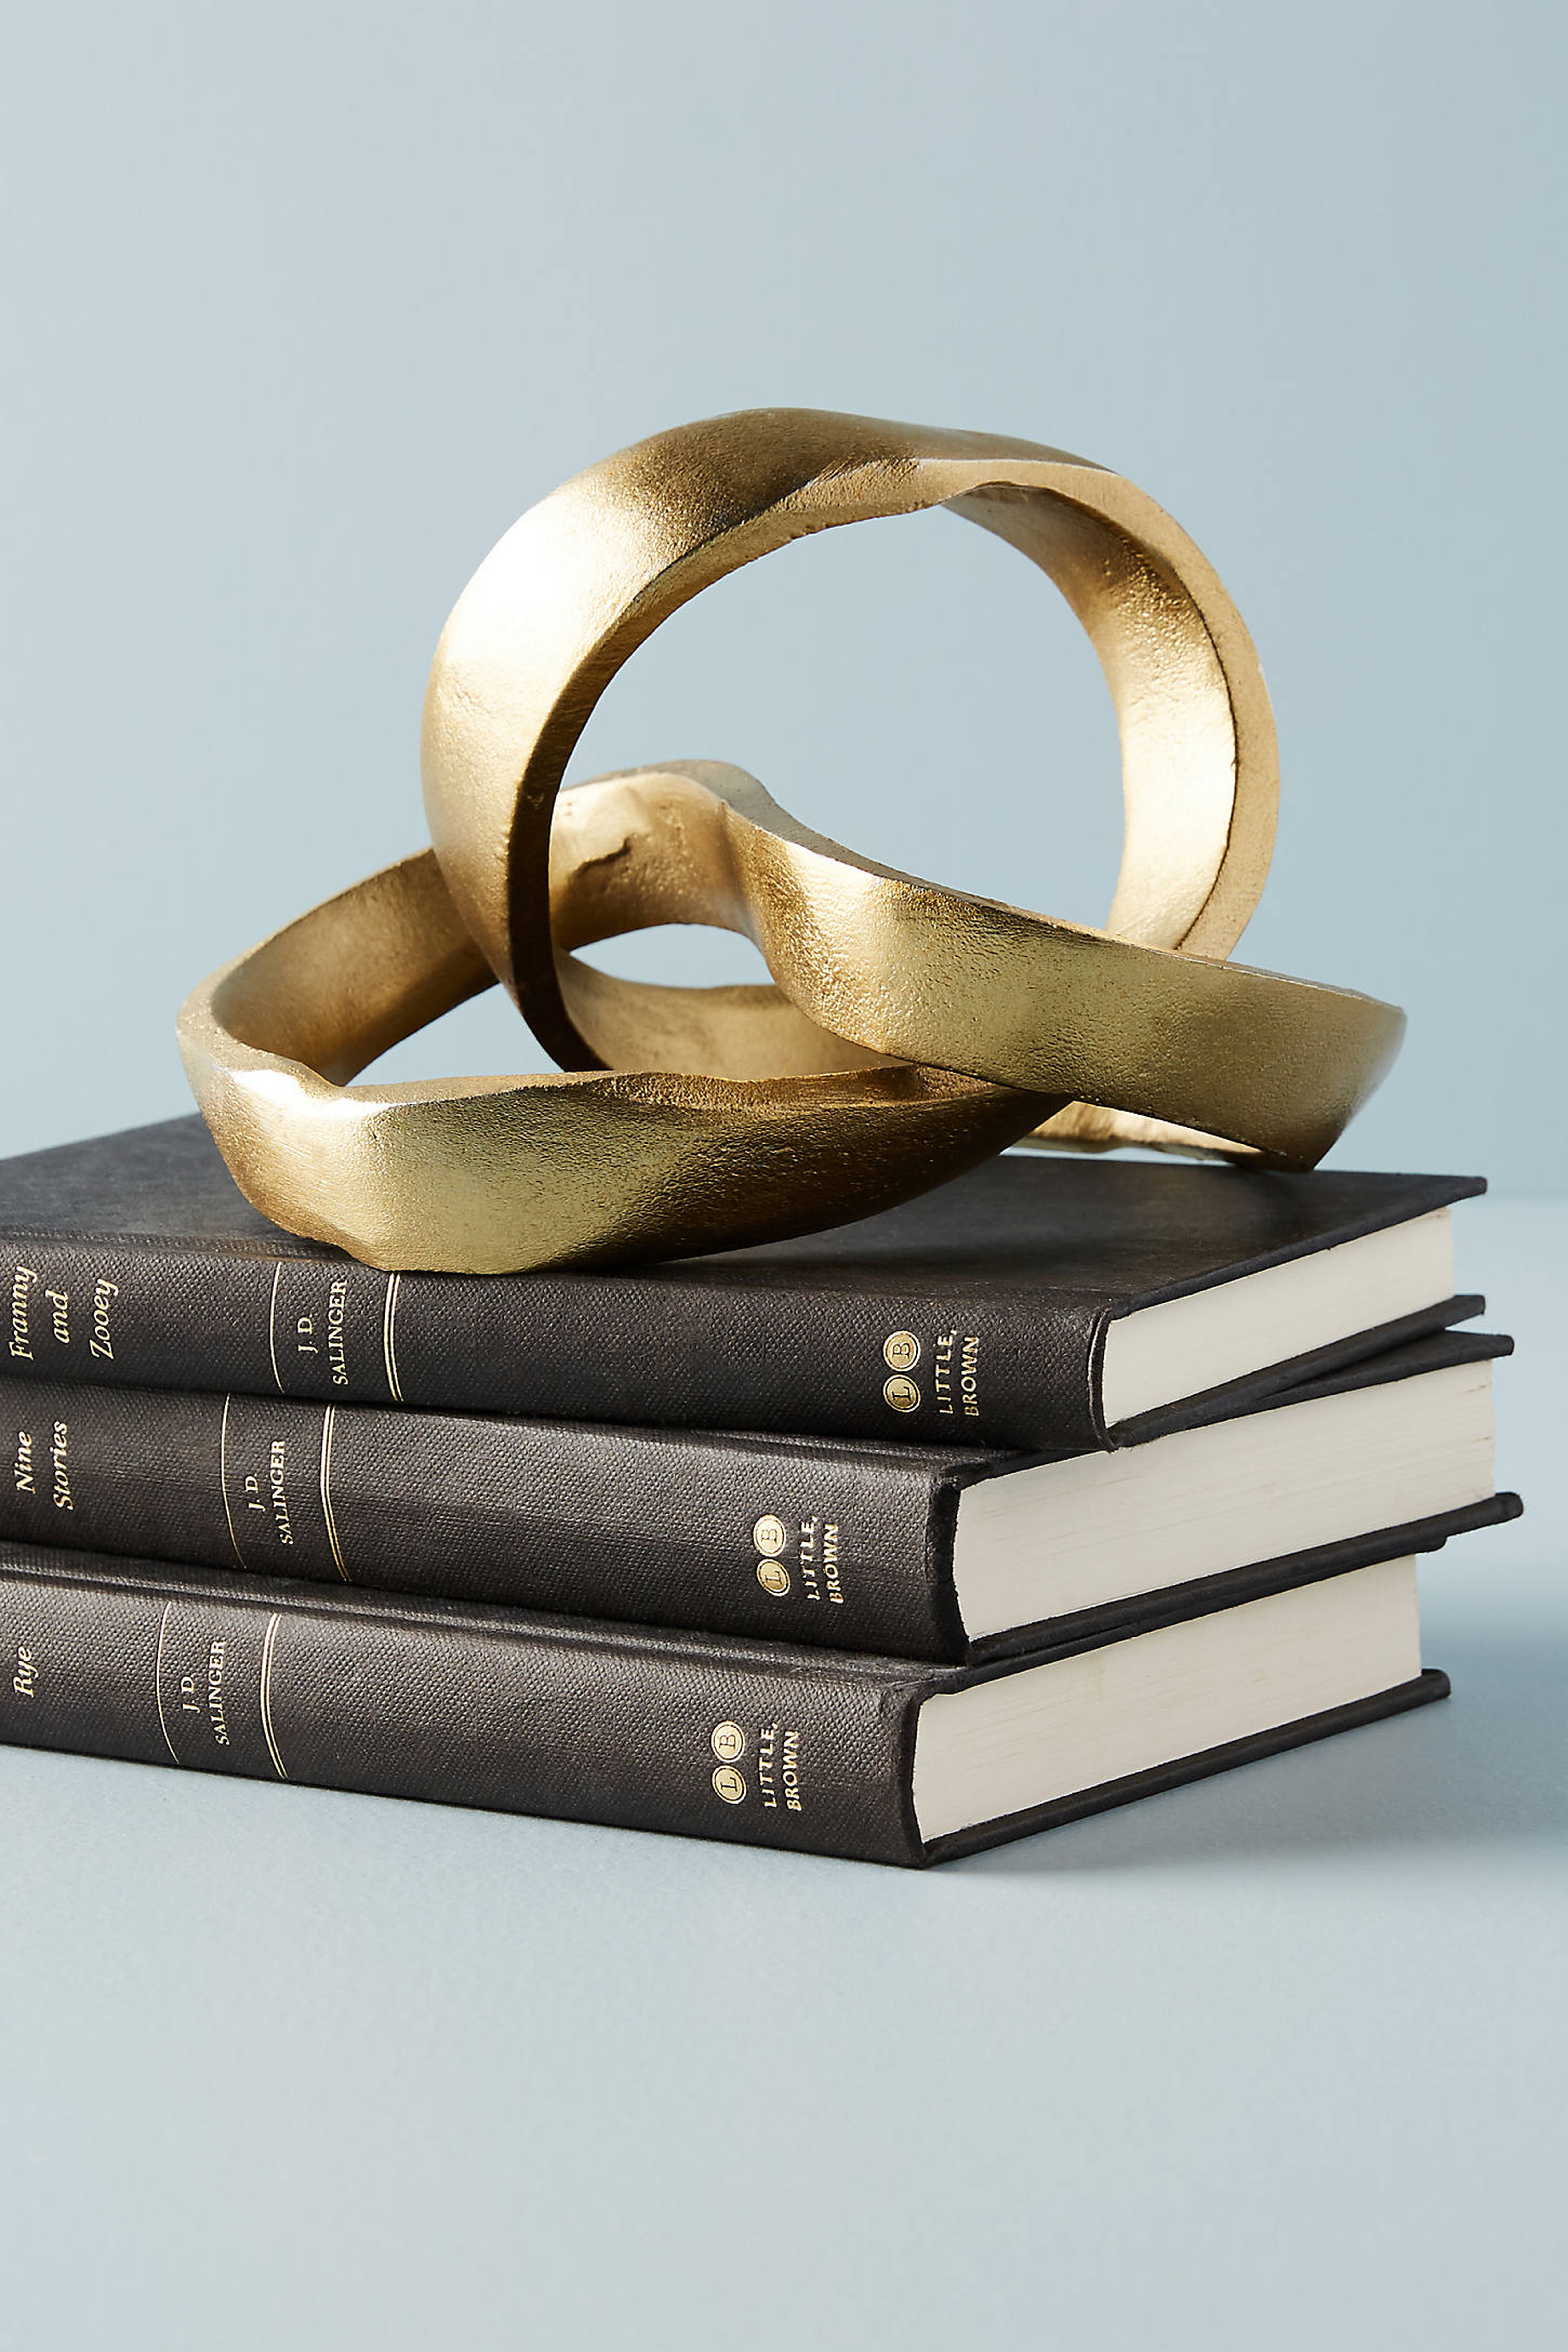 Knotted Decorative Object By Anthropologie in Gold - Anthropologie